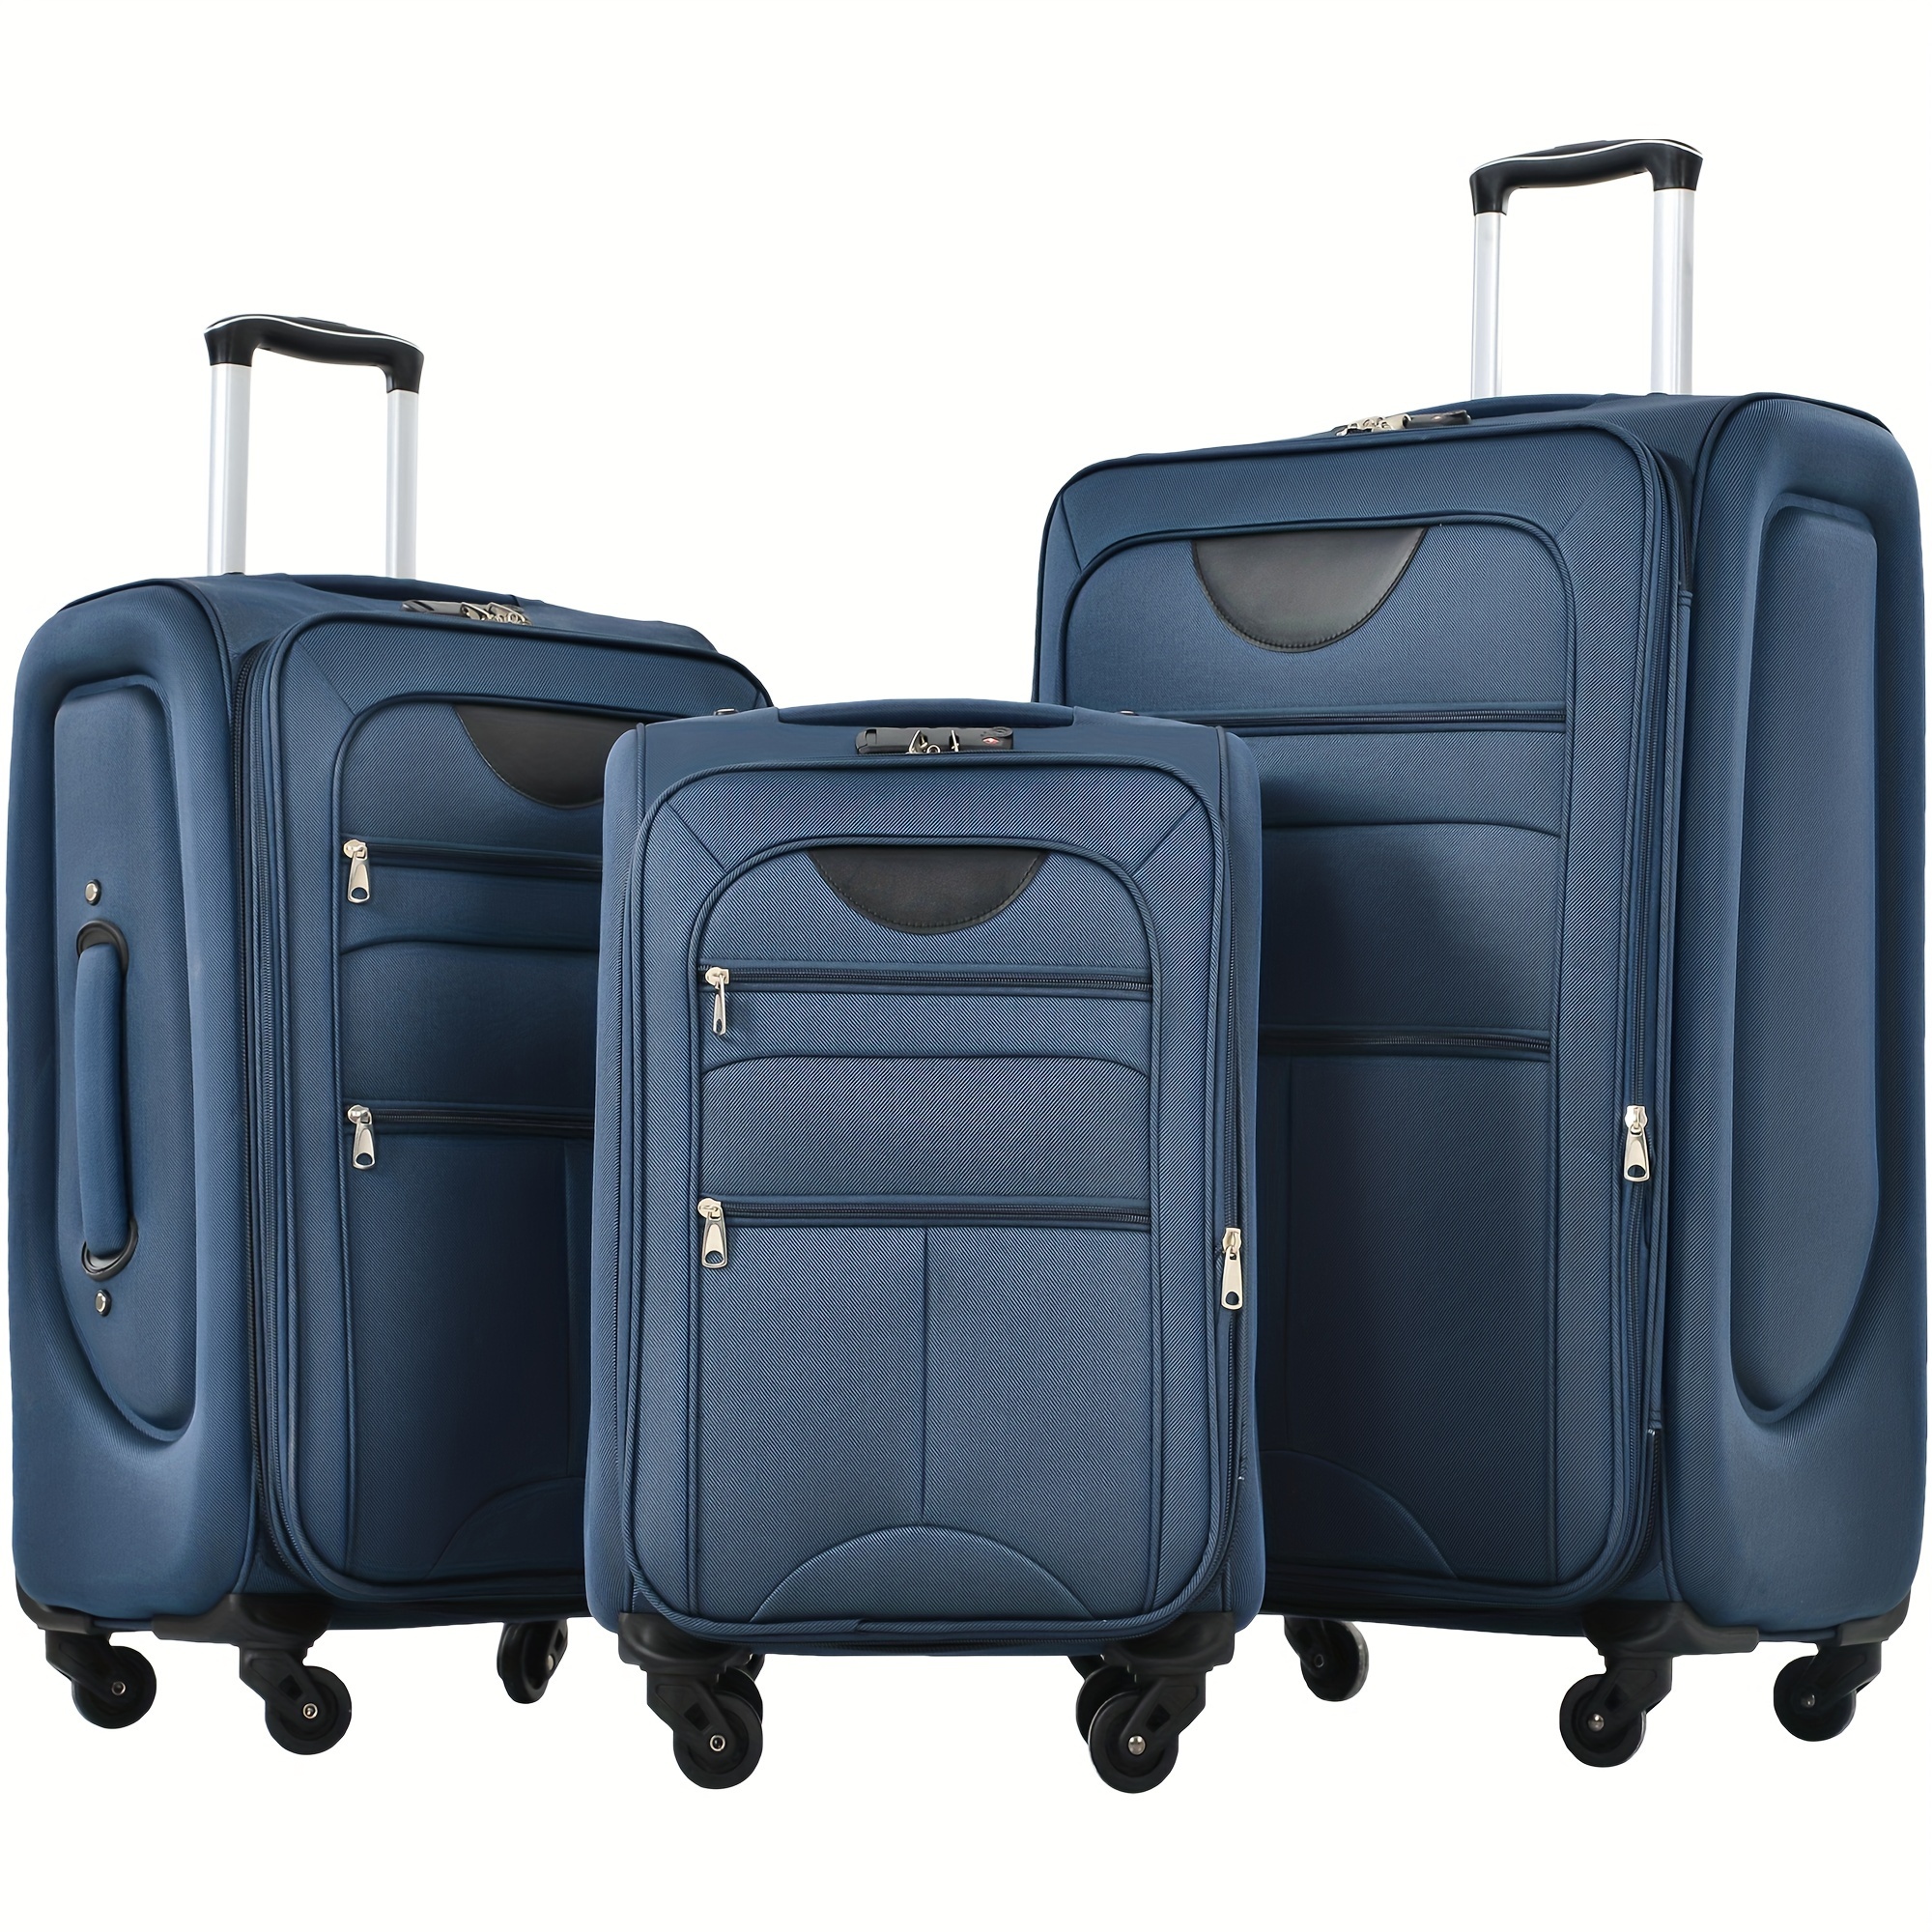 

Soft Side Luggage Expandable 3 Sets Of Suitcases With Upright Rotating Soft Shell Lightweight Luggage Travel Set In Dark Blue